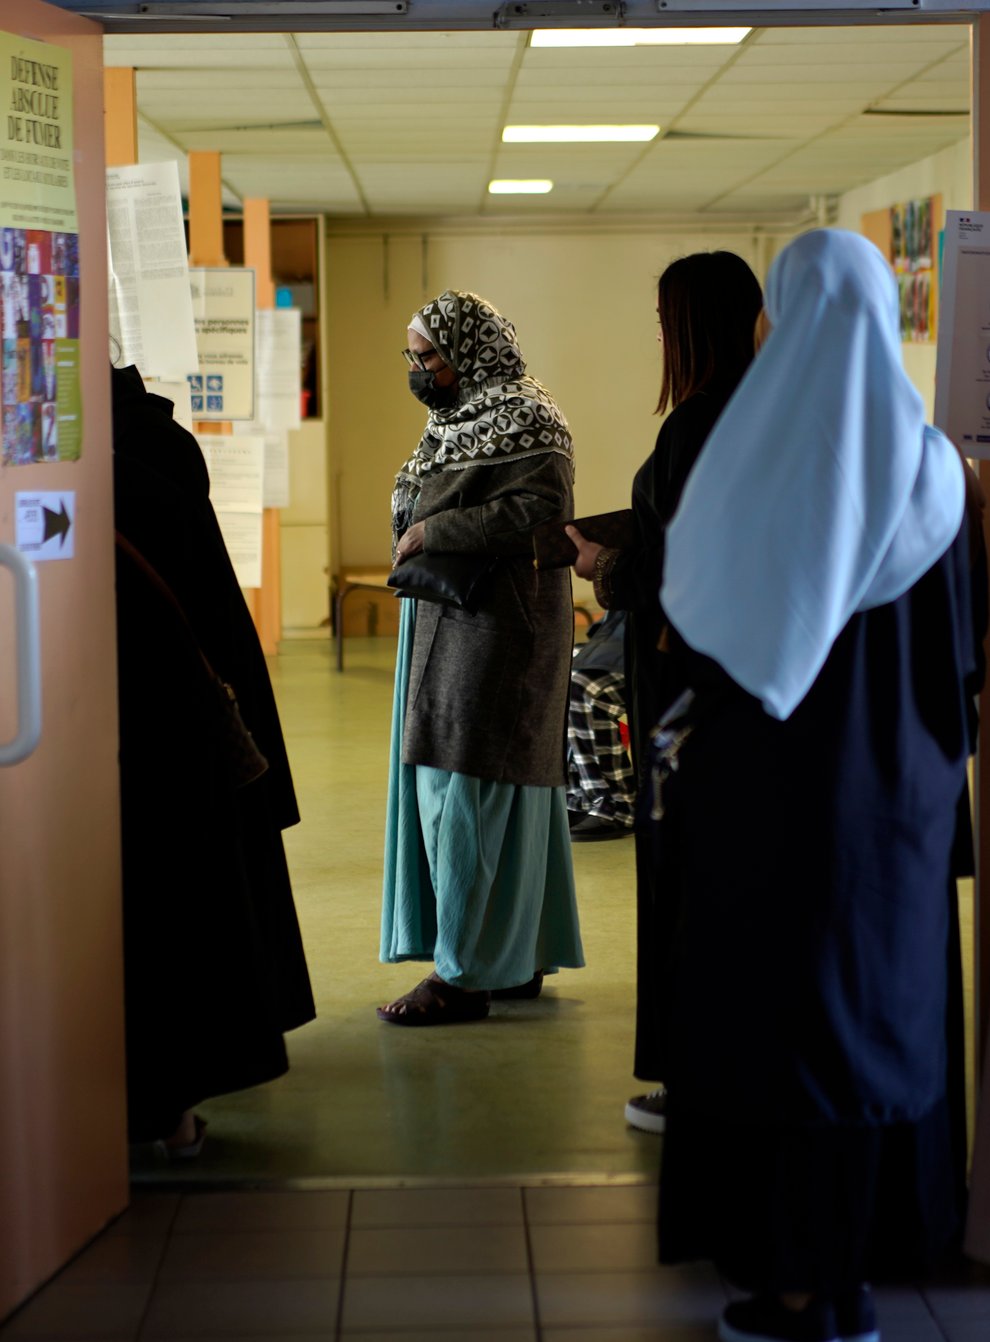 Women wait in line before voting for the first round of the presidential election at a polling station on Sunday April 10 in the Malpasse northern district of Marseille, southern France (Daniel Cole/AP)